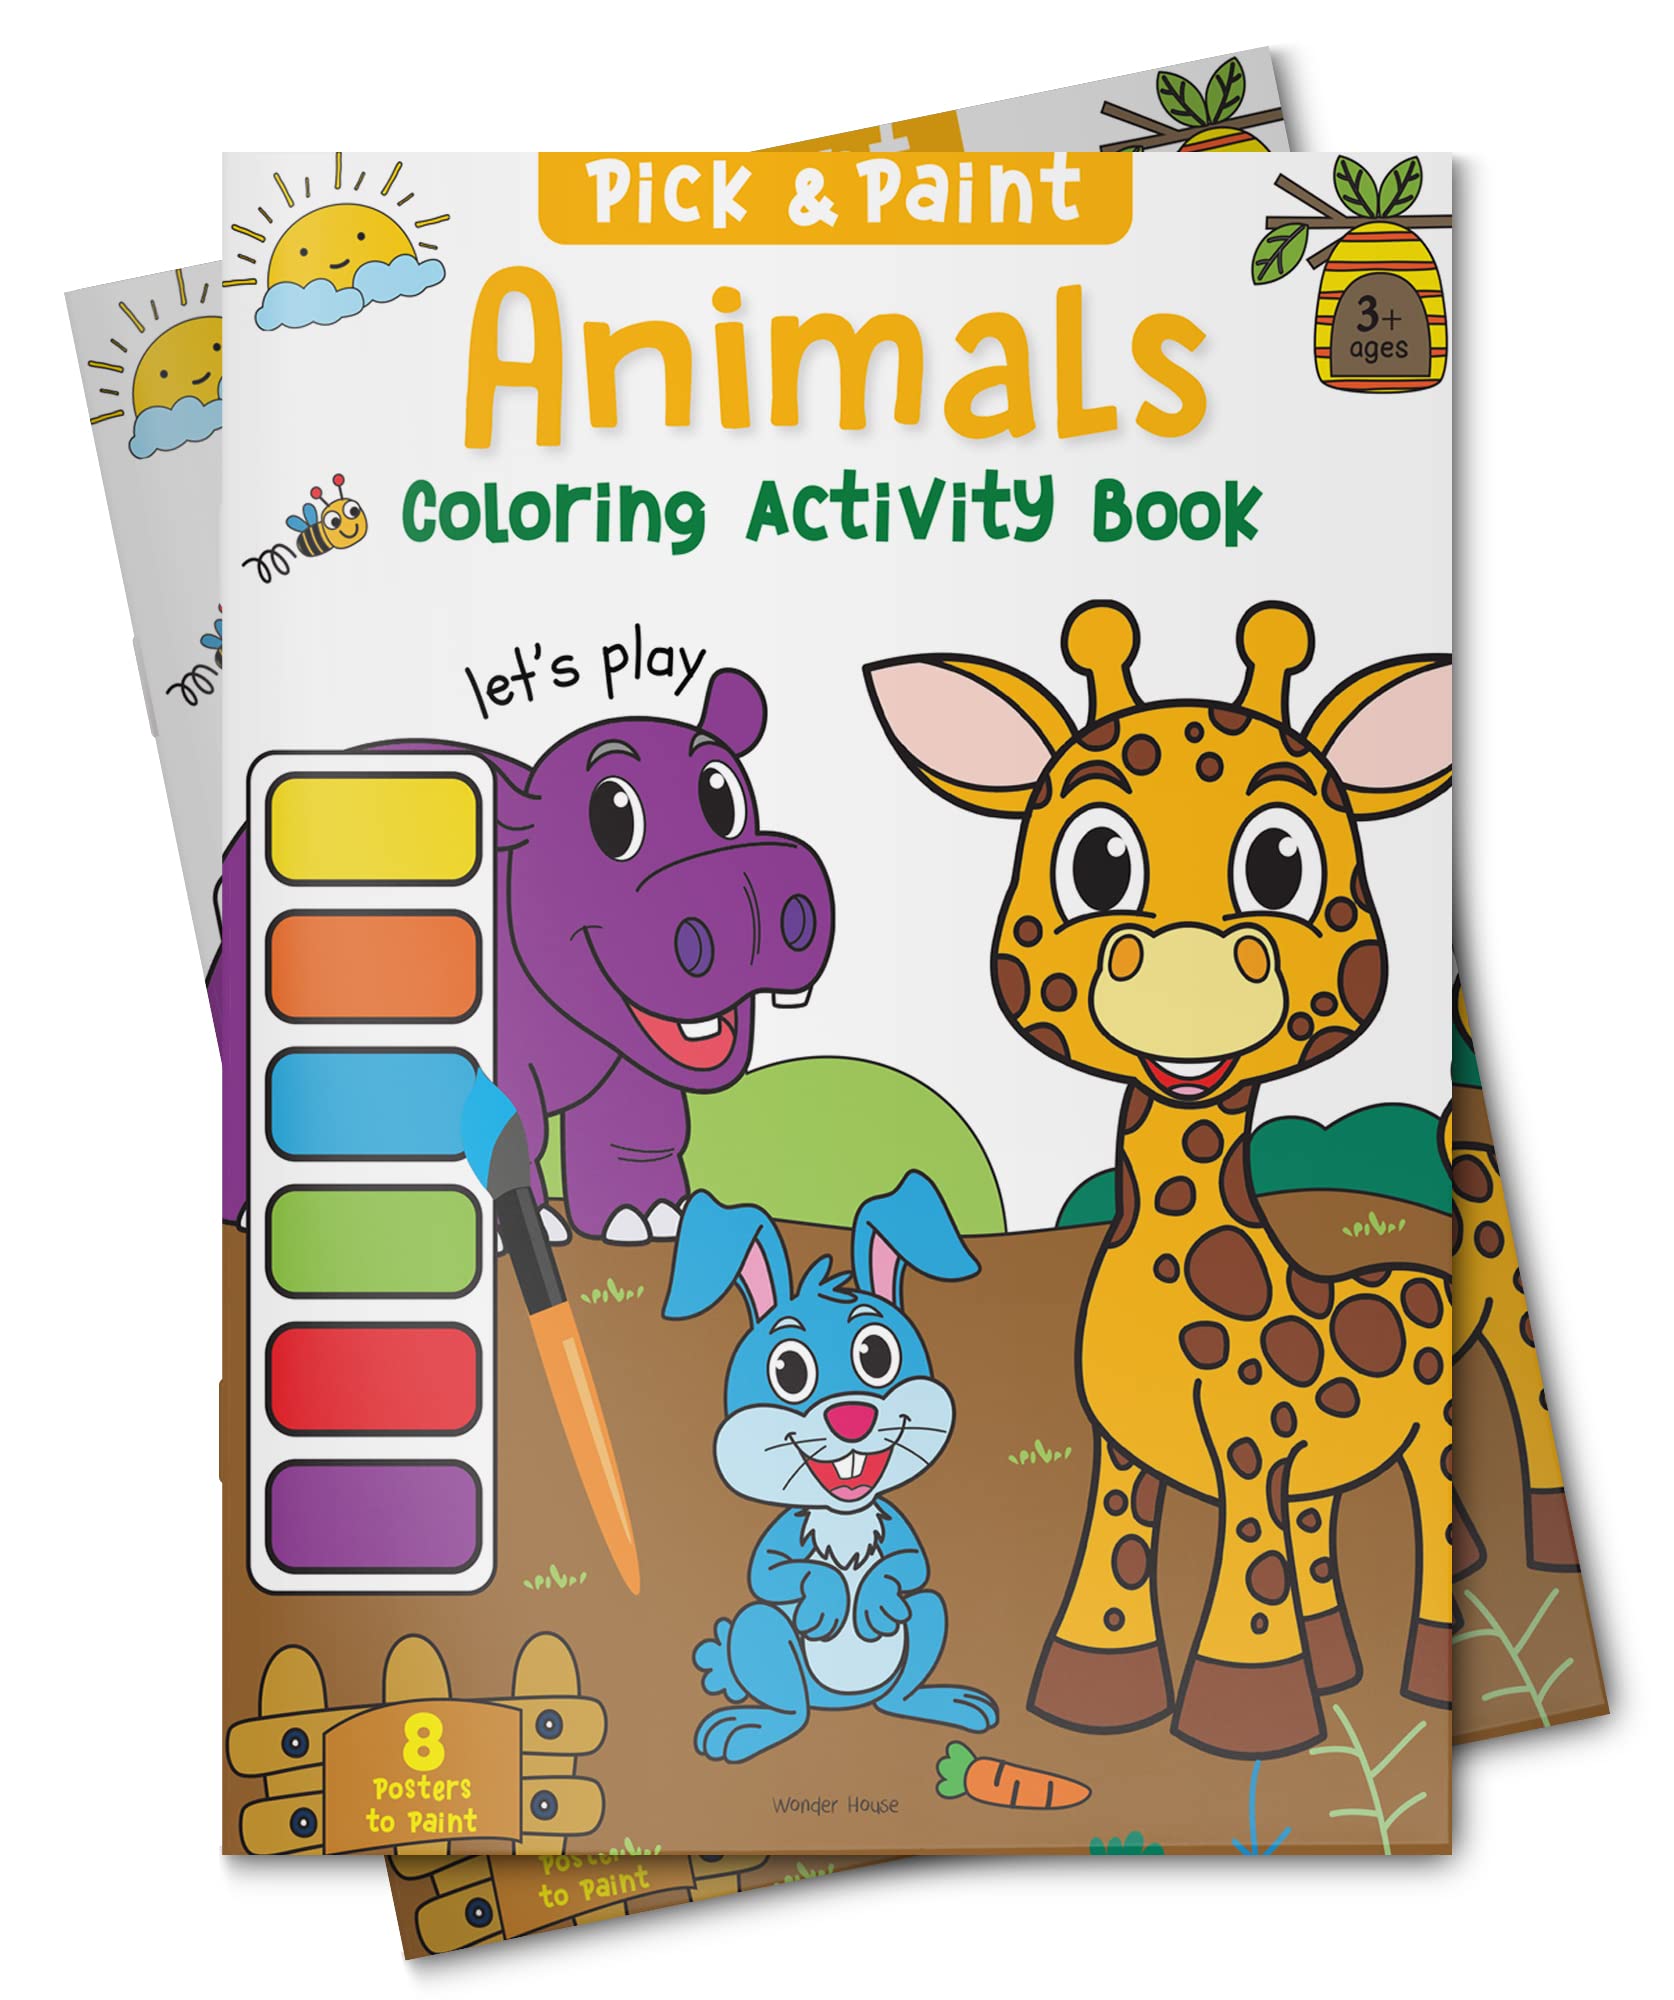 Animals: Pick & Paint Coloring Activity Book